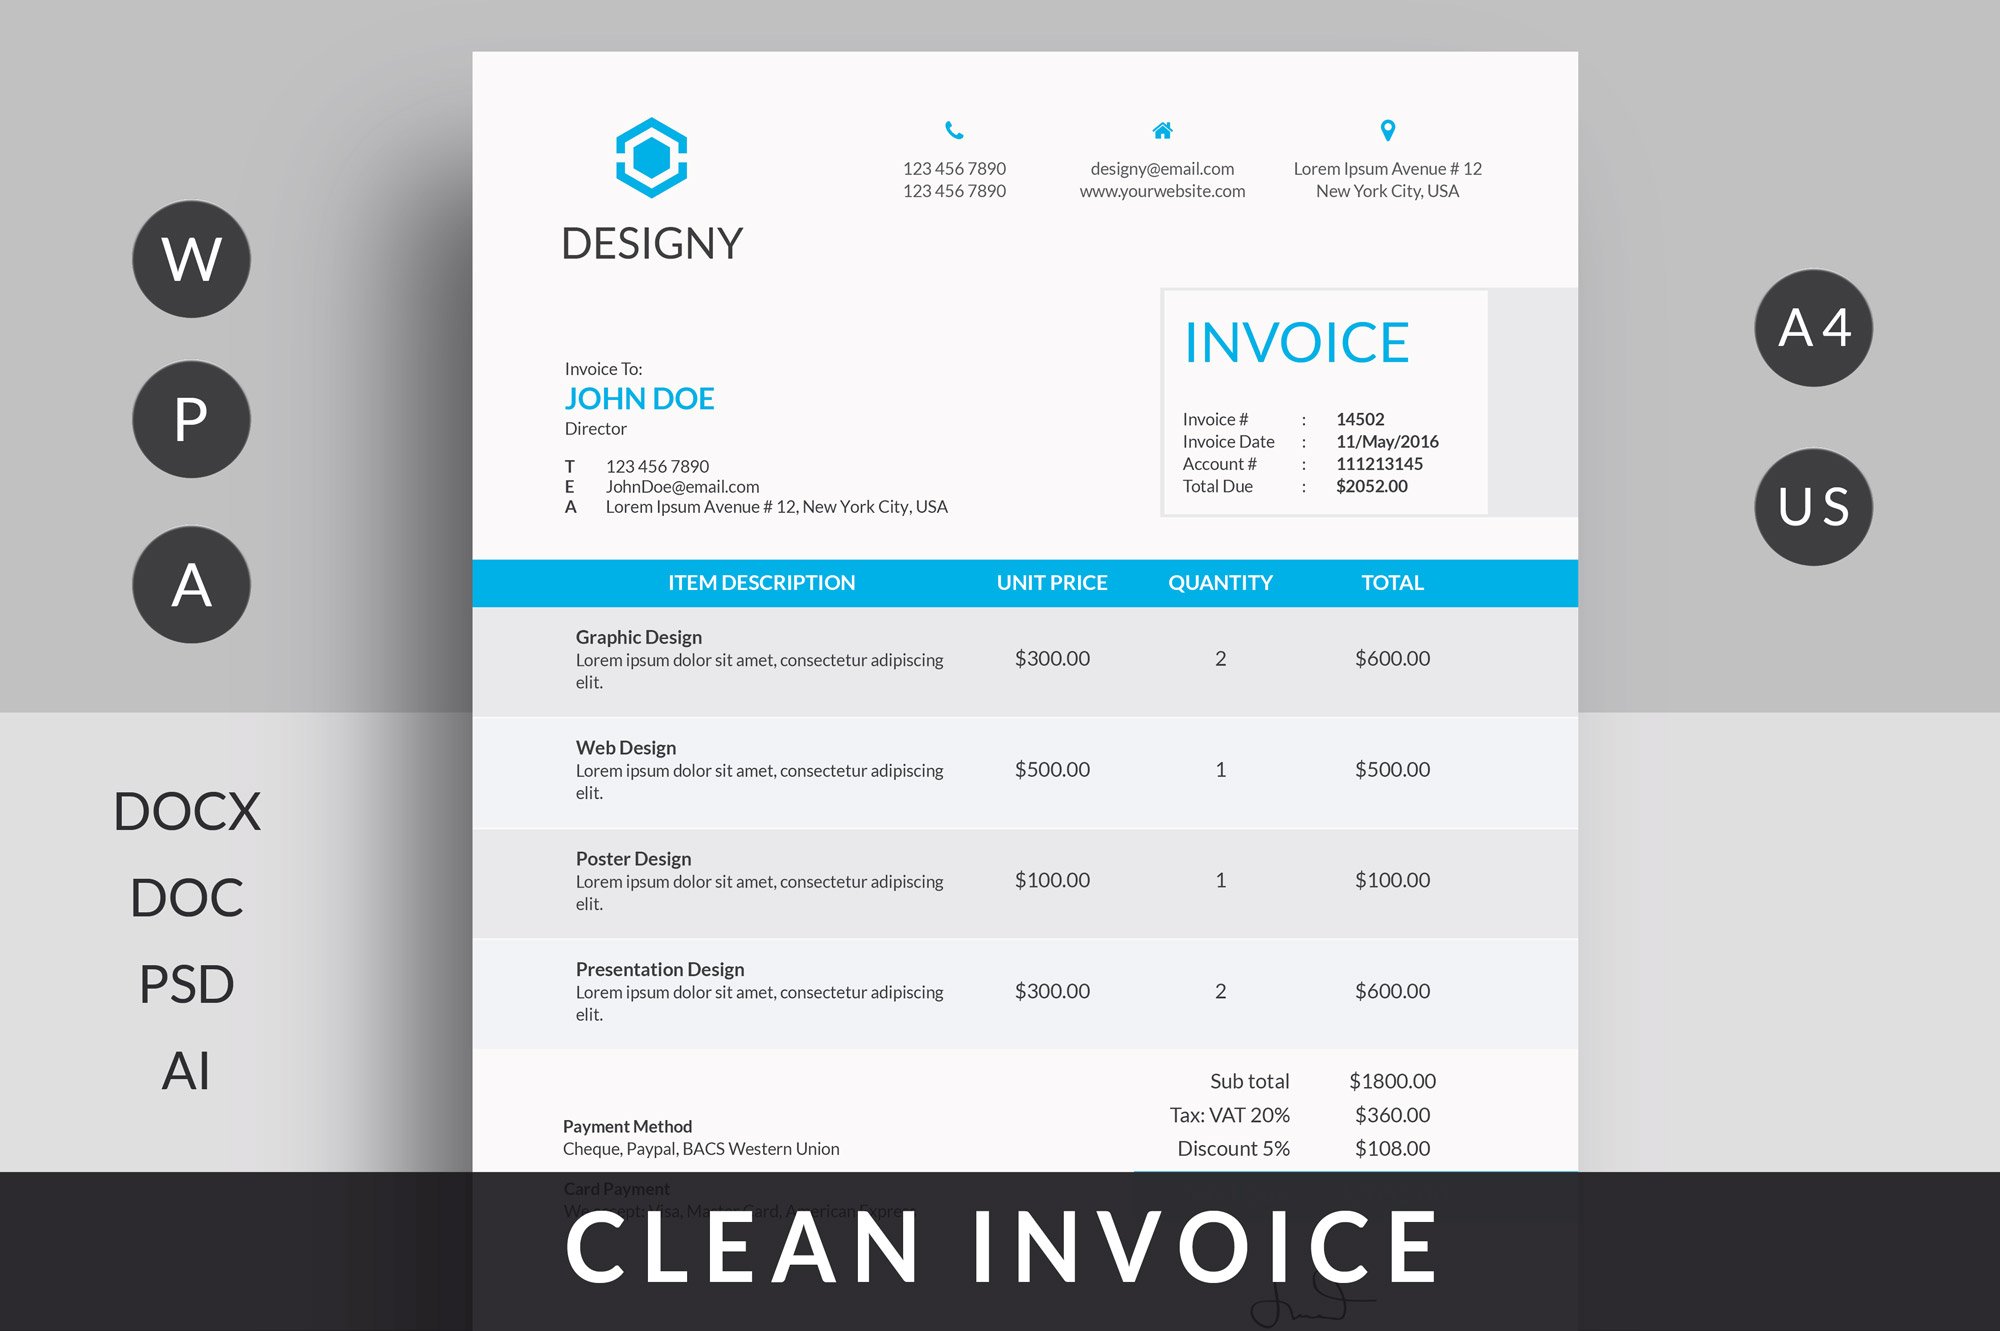 Clean Invoice cover image.